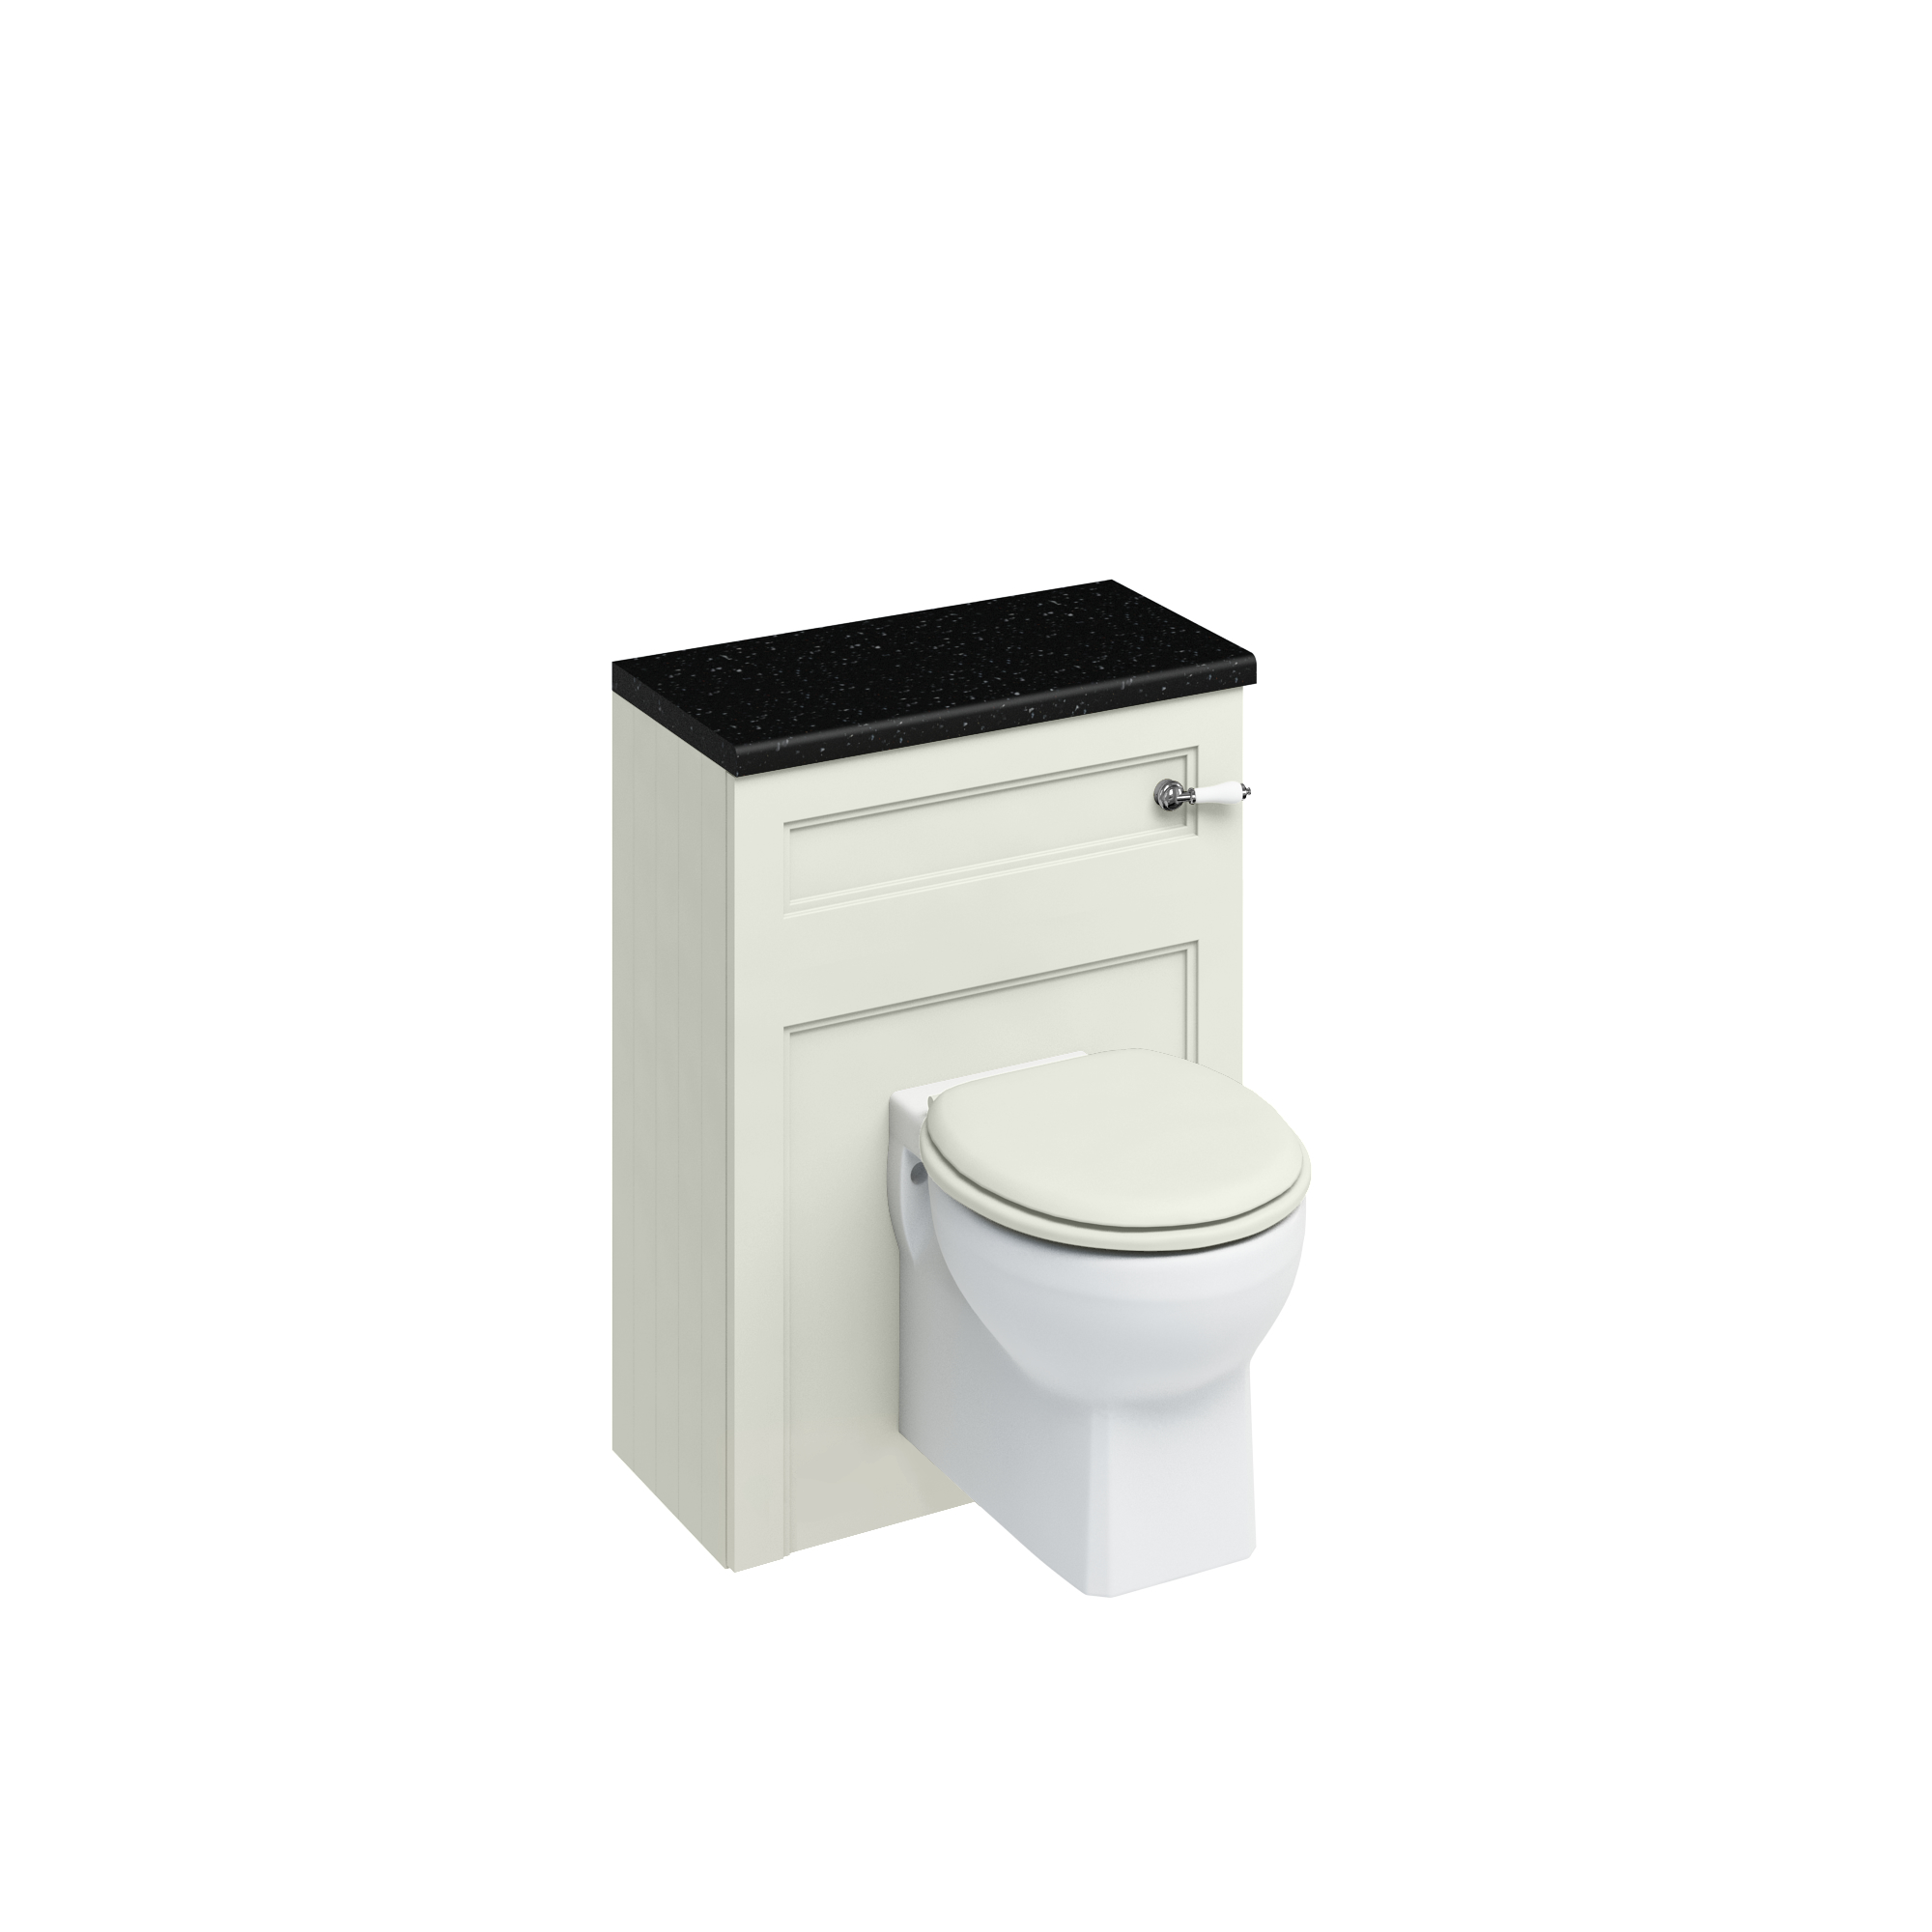 60 Wall hung WC Unit (including the cistern tank - lever flush ) - Sand